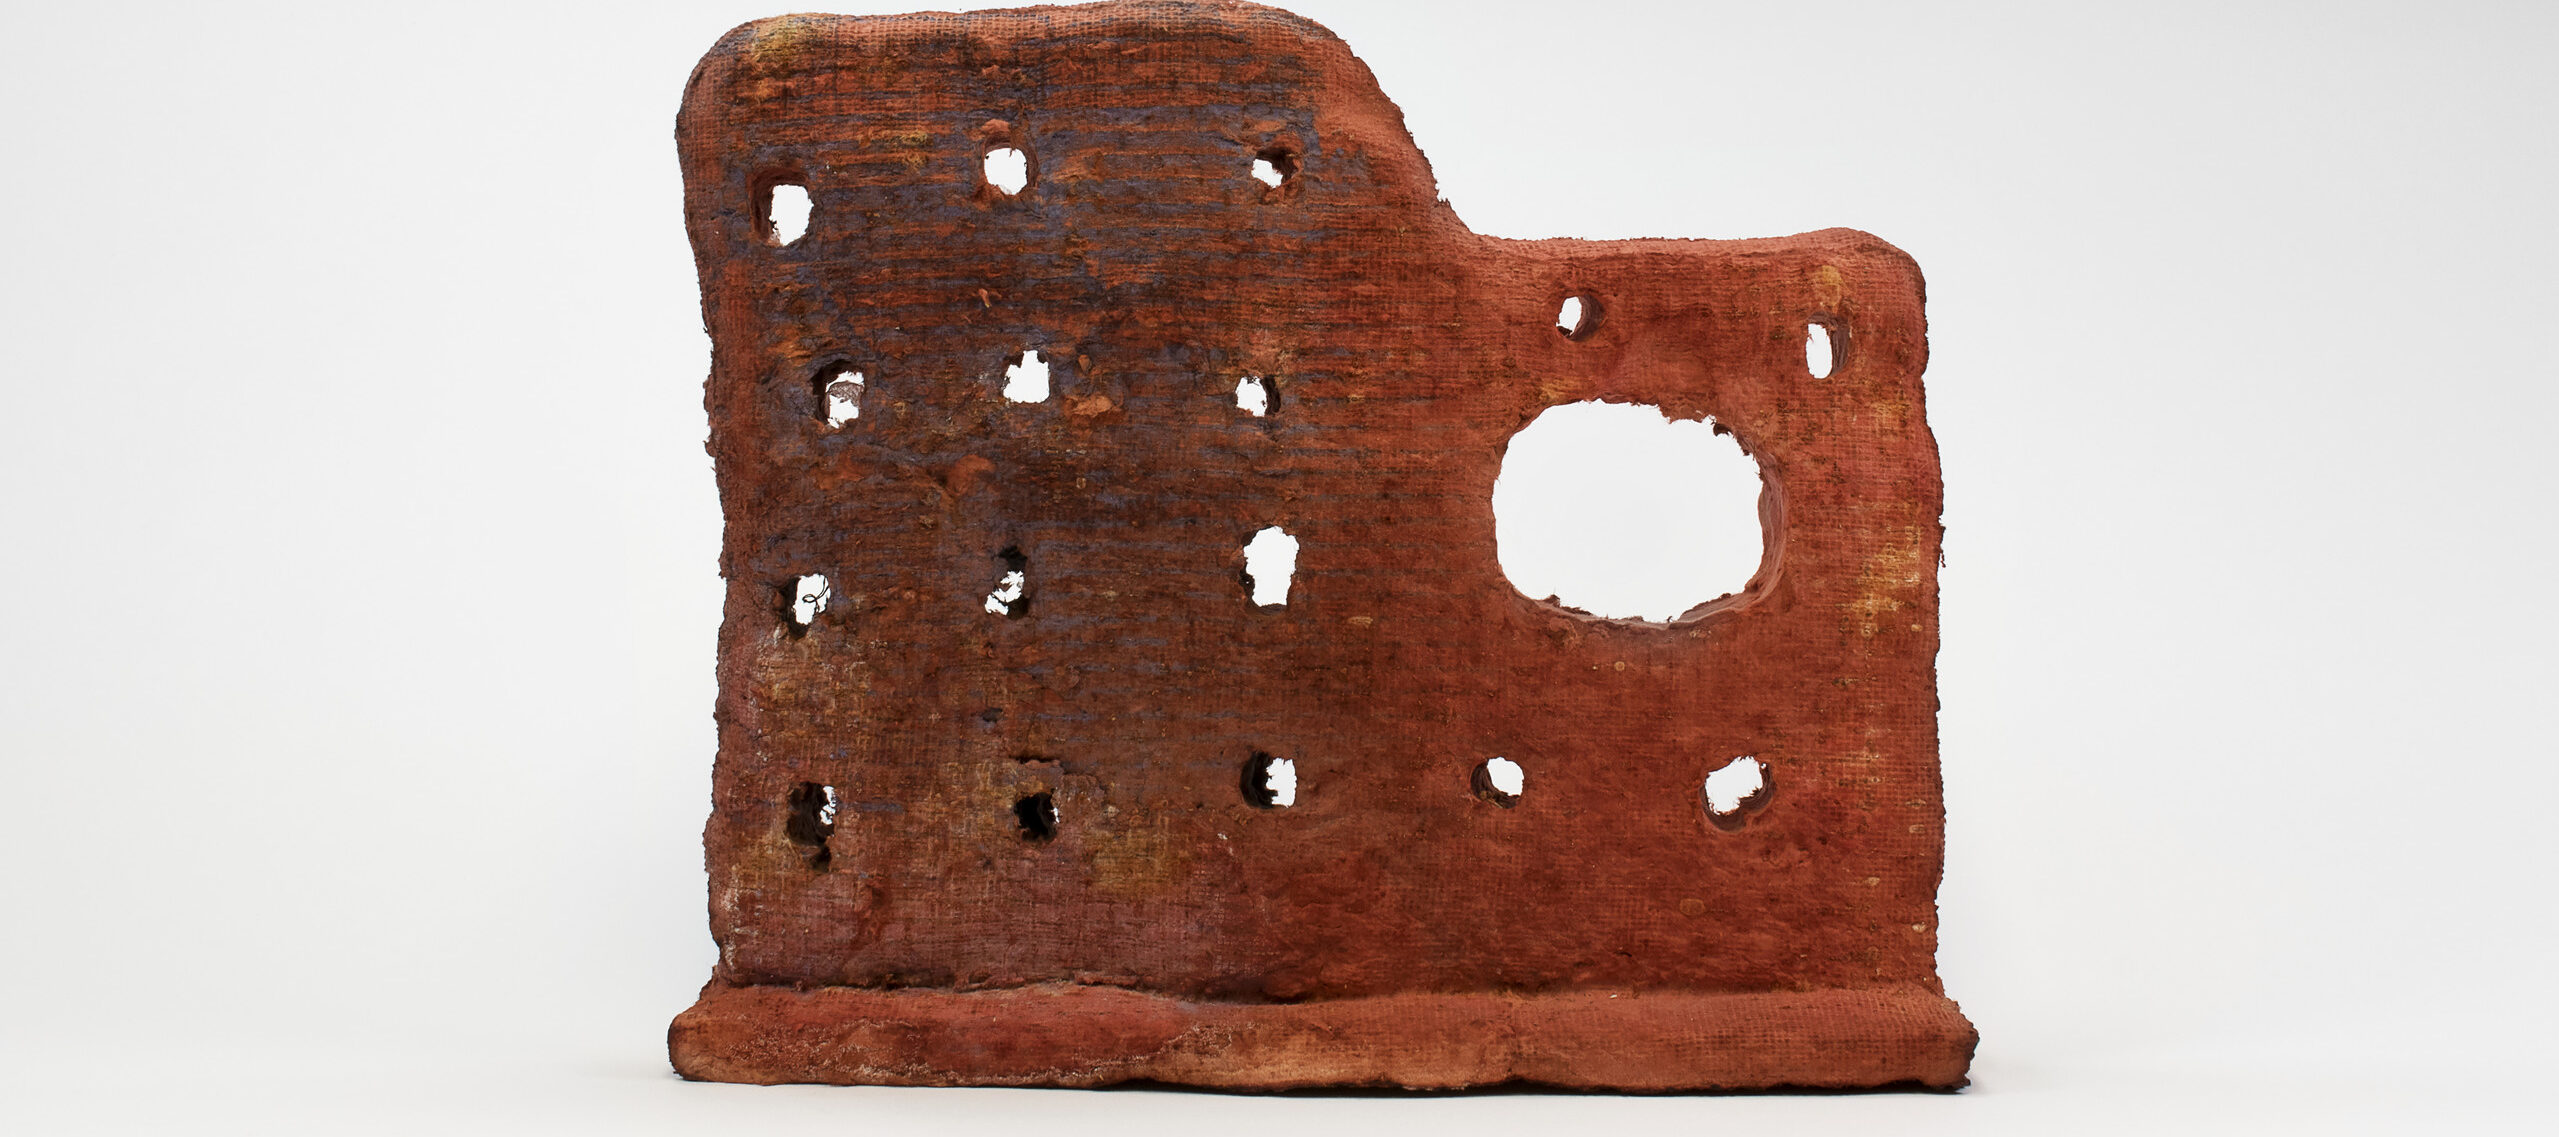 An irregular shaped red abstract sculpture that looks like the side wall of an old building structure. Rows of holes and one bigger void space cover the surface of the grainy, rough sculpture.